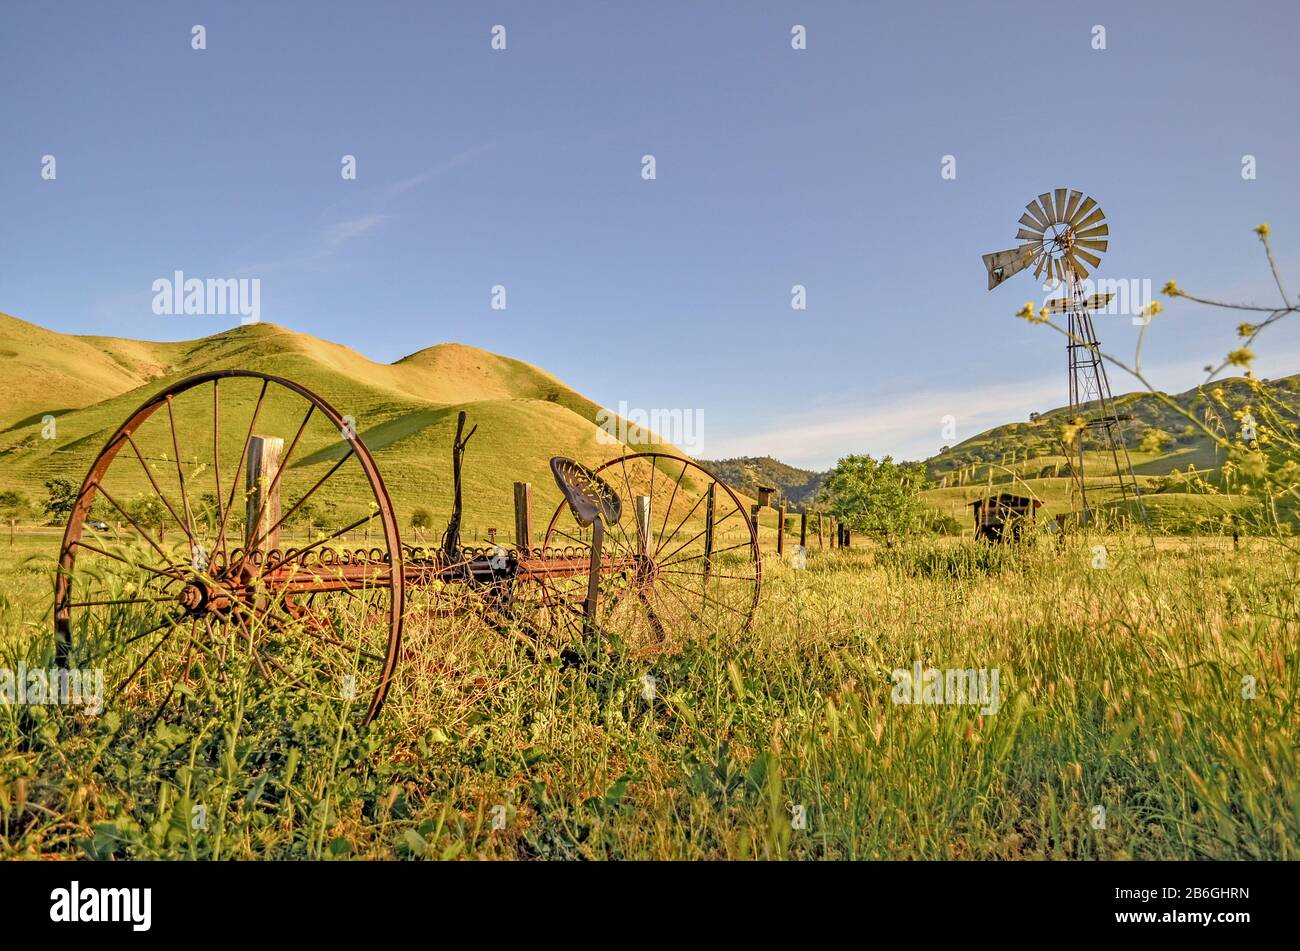 Abandoned rusty farm equipment and windmill with green field and hills, Black Diamond Mines, Nortonville, Antioch, Pittsburg, California, USA Stock Photo